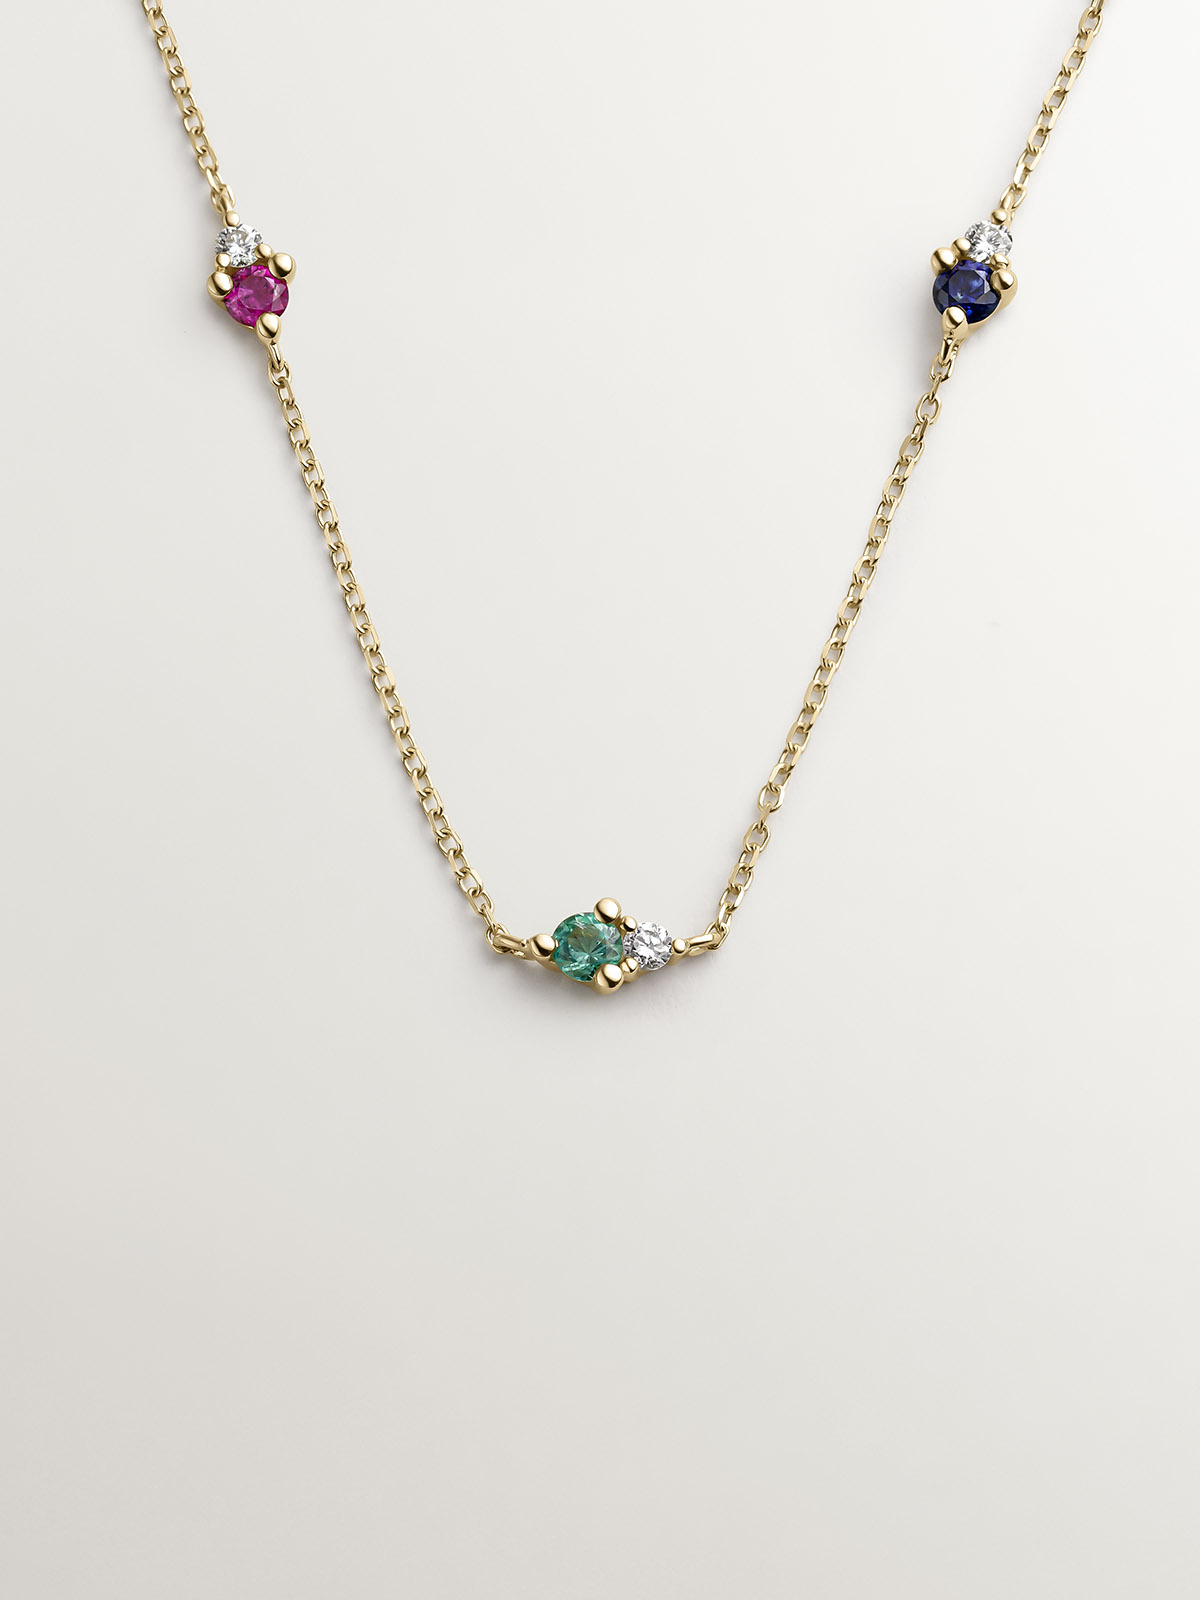 9K yellow gold necklace with sapphire, emerald, ruby, and diamonds.